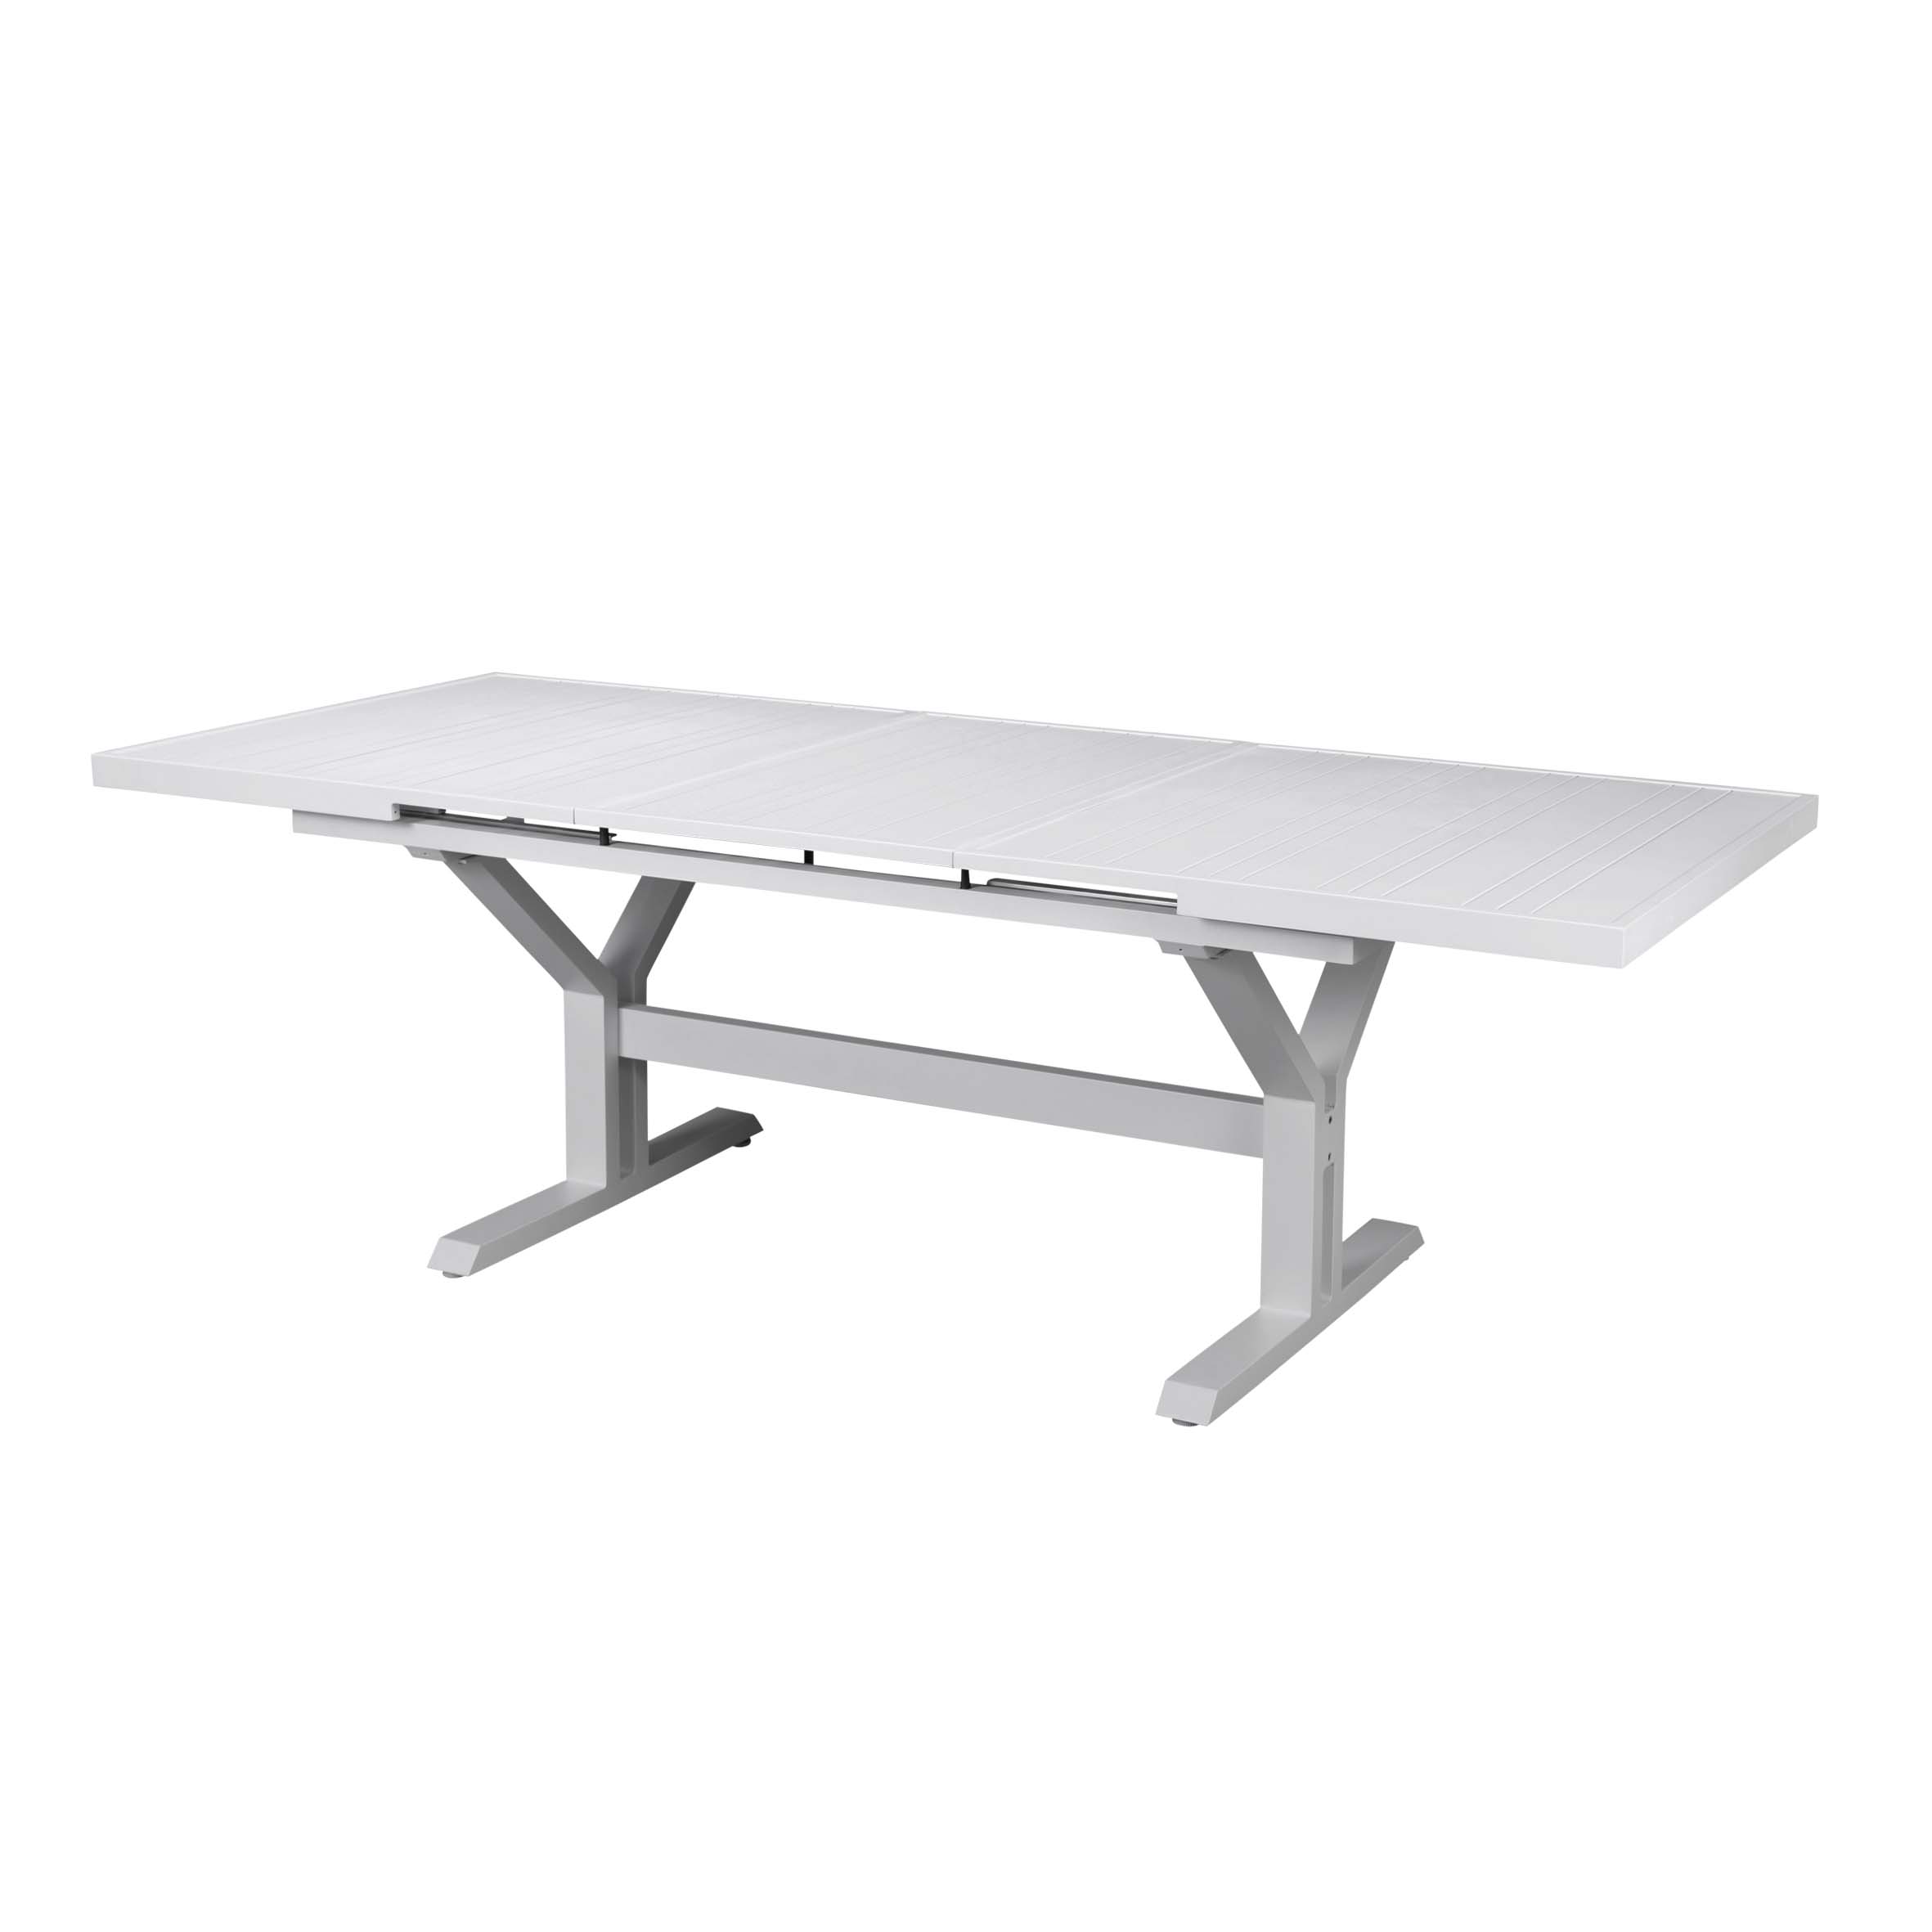 Tiffany auto extension table S1